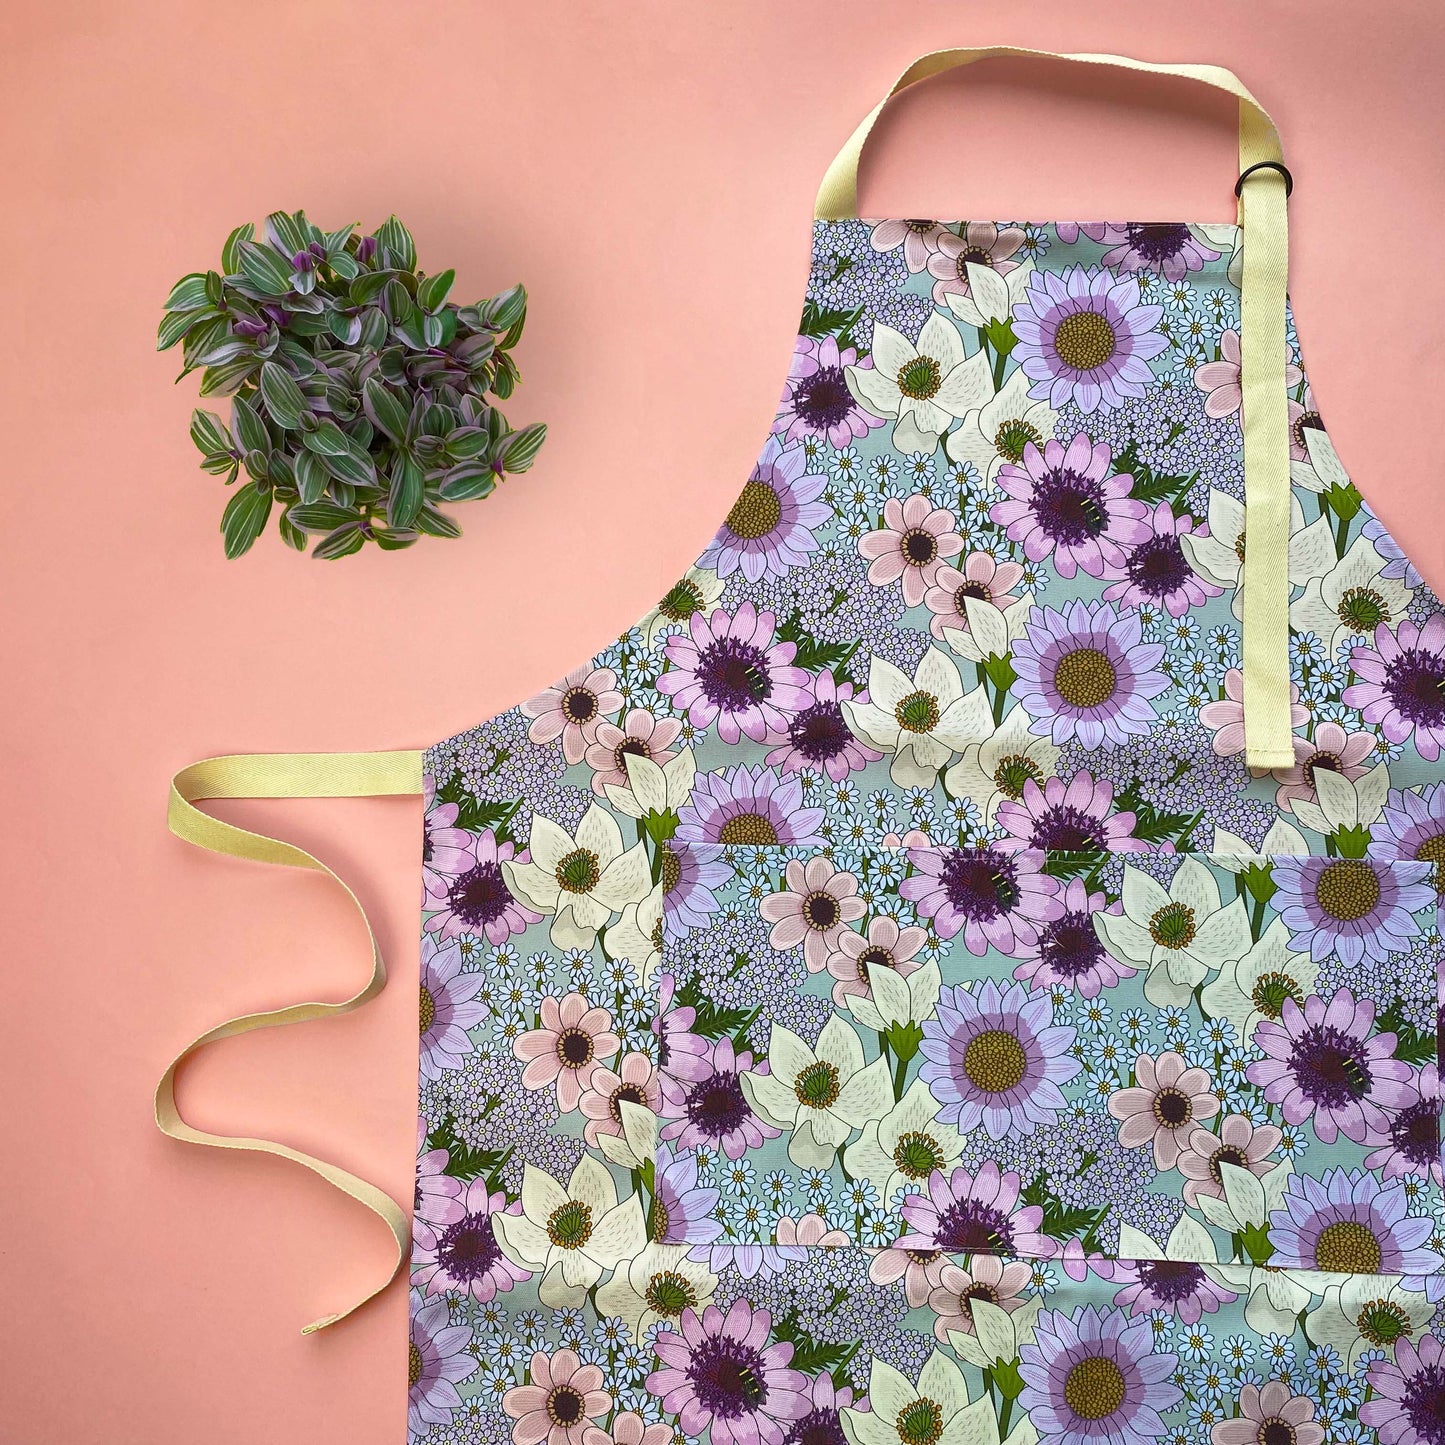 The Wildflower Apron